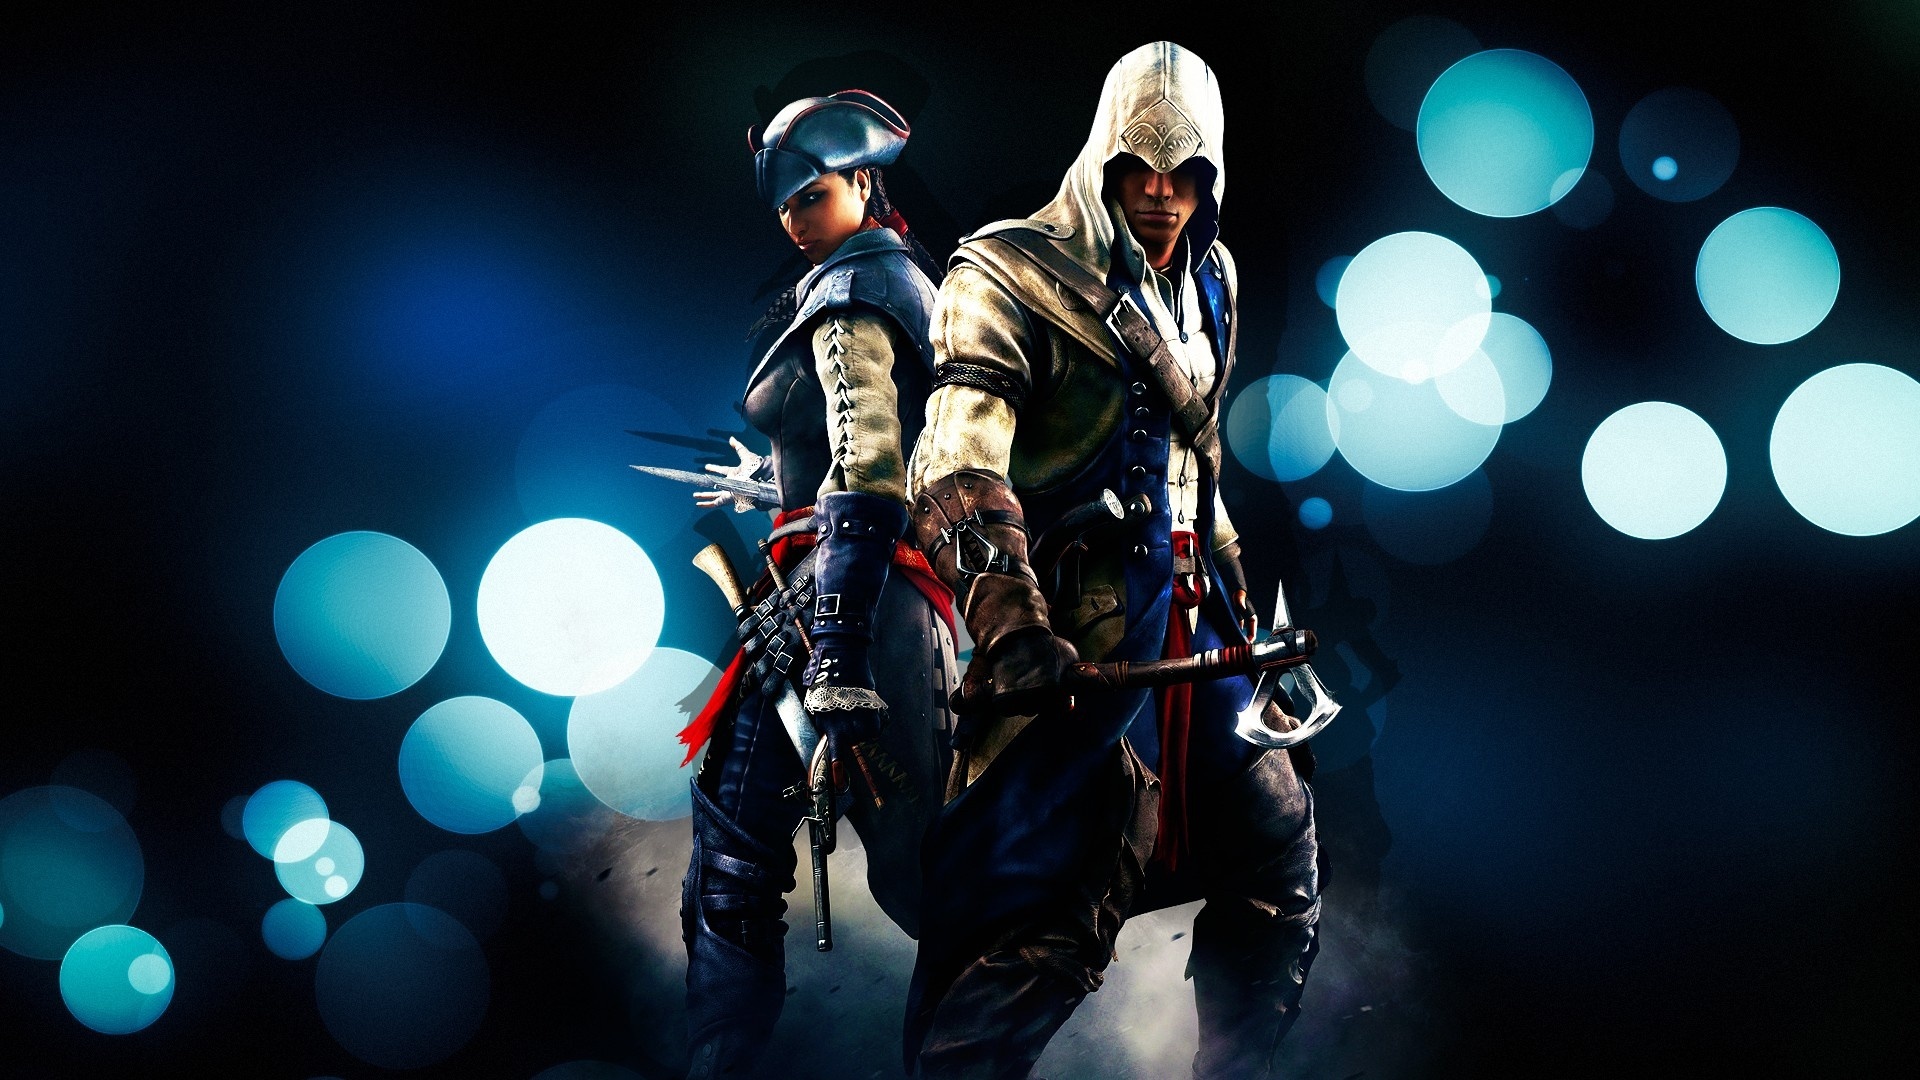 assassins, Creed, Creed, Warrior, Soldier, Weapons, People, Sparkle, Men, Males, Fantasy, Video Wallpaper